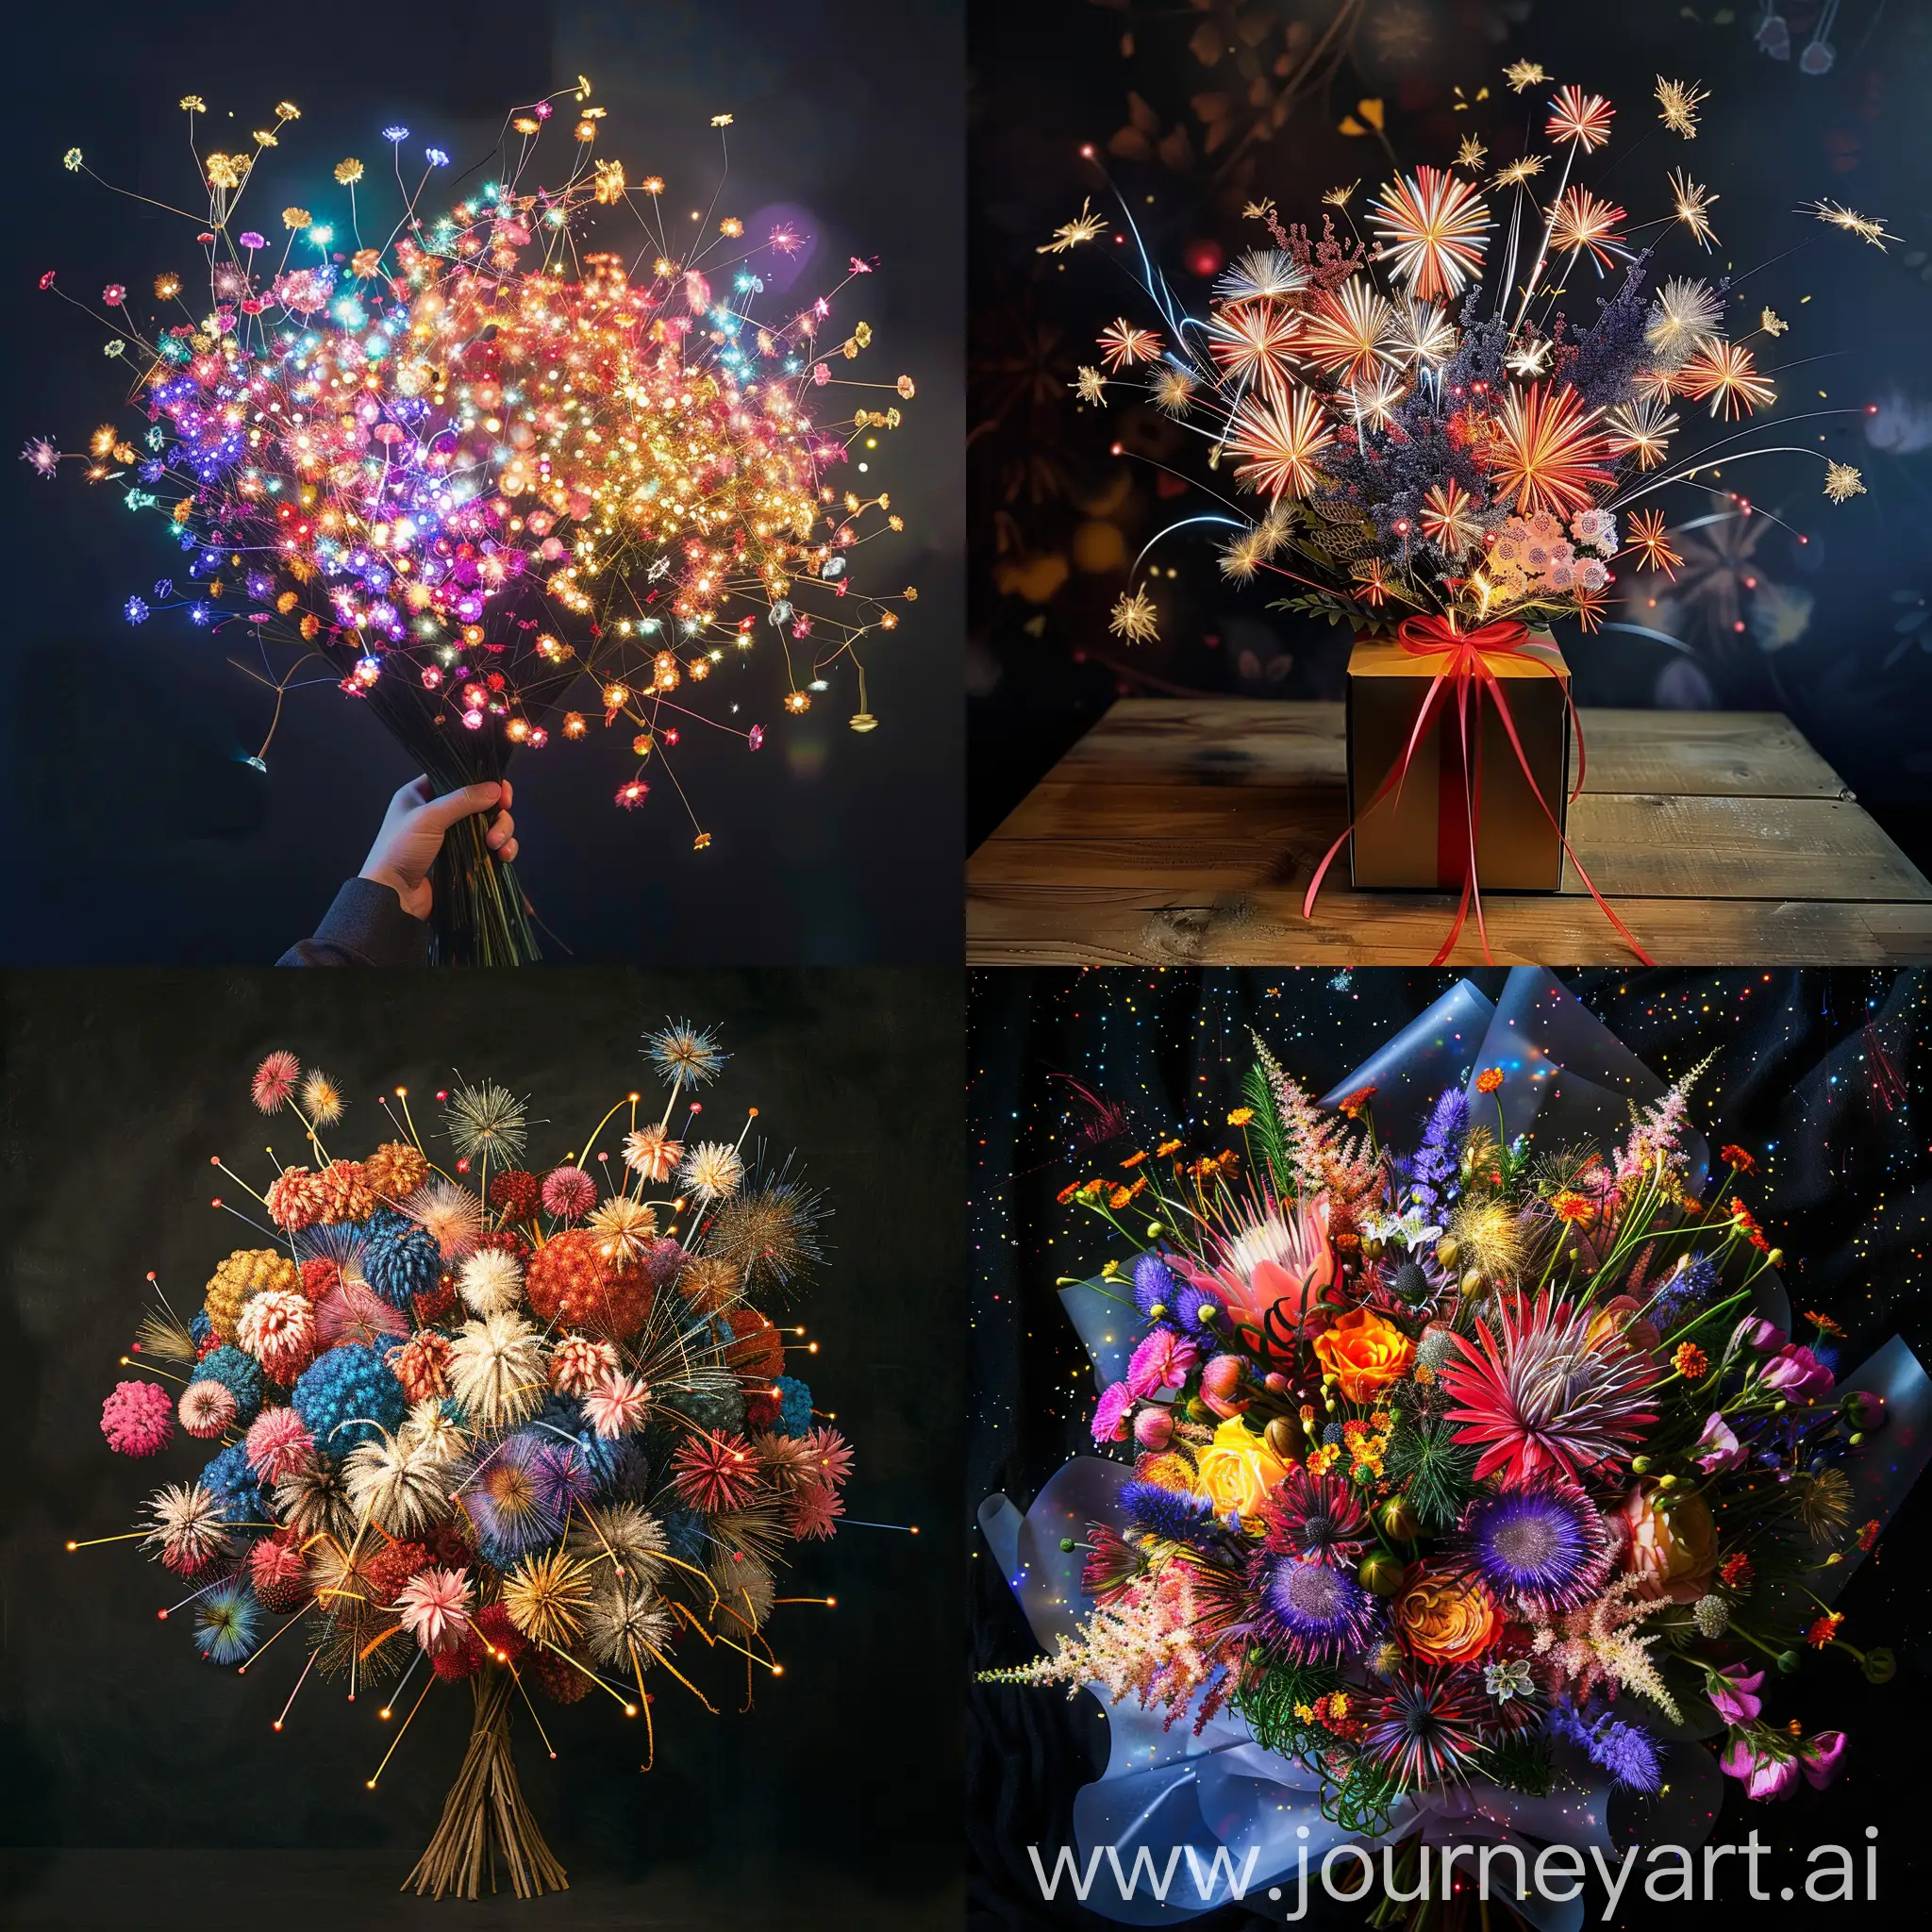 Vibrant-Bouquet-of-Fireworks-Packages-Displayed-in-Celebration